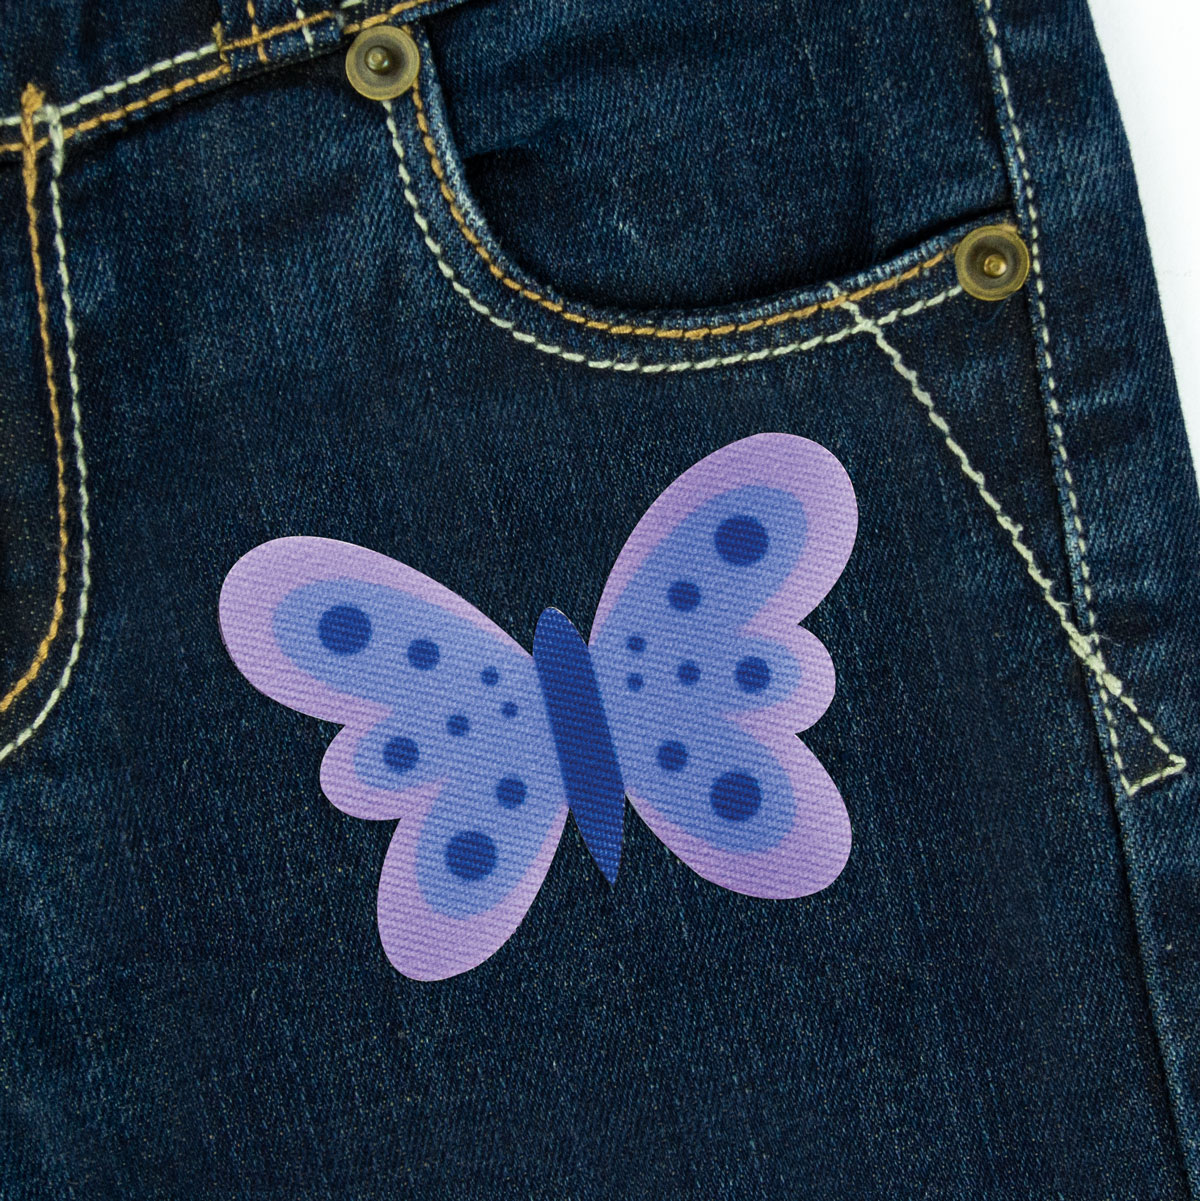 Iron-On Patch Purple Butterfly